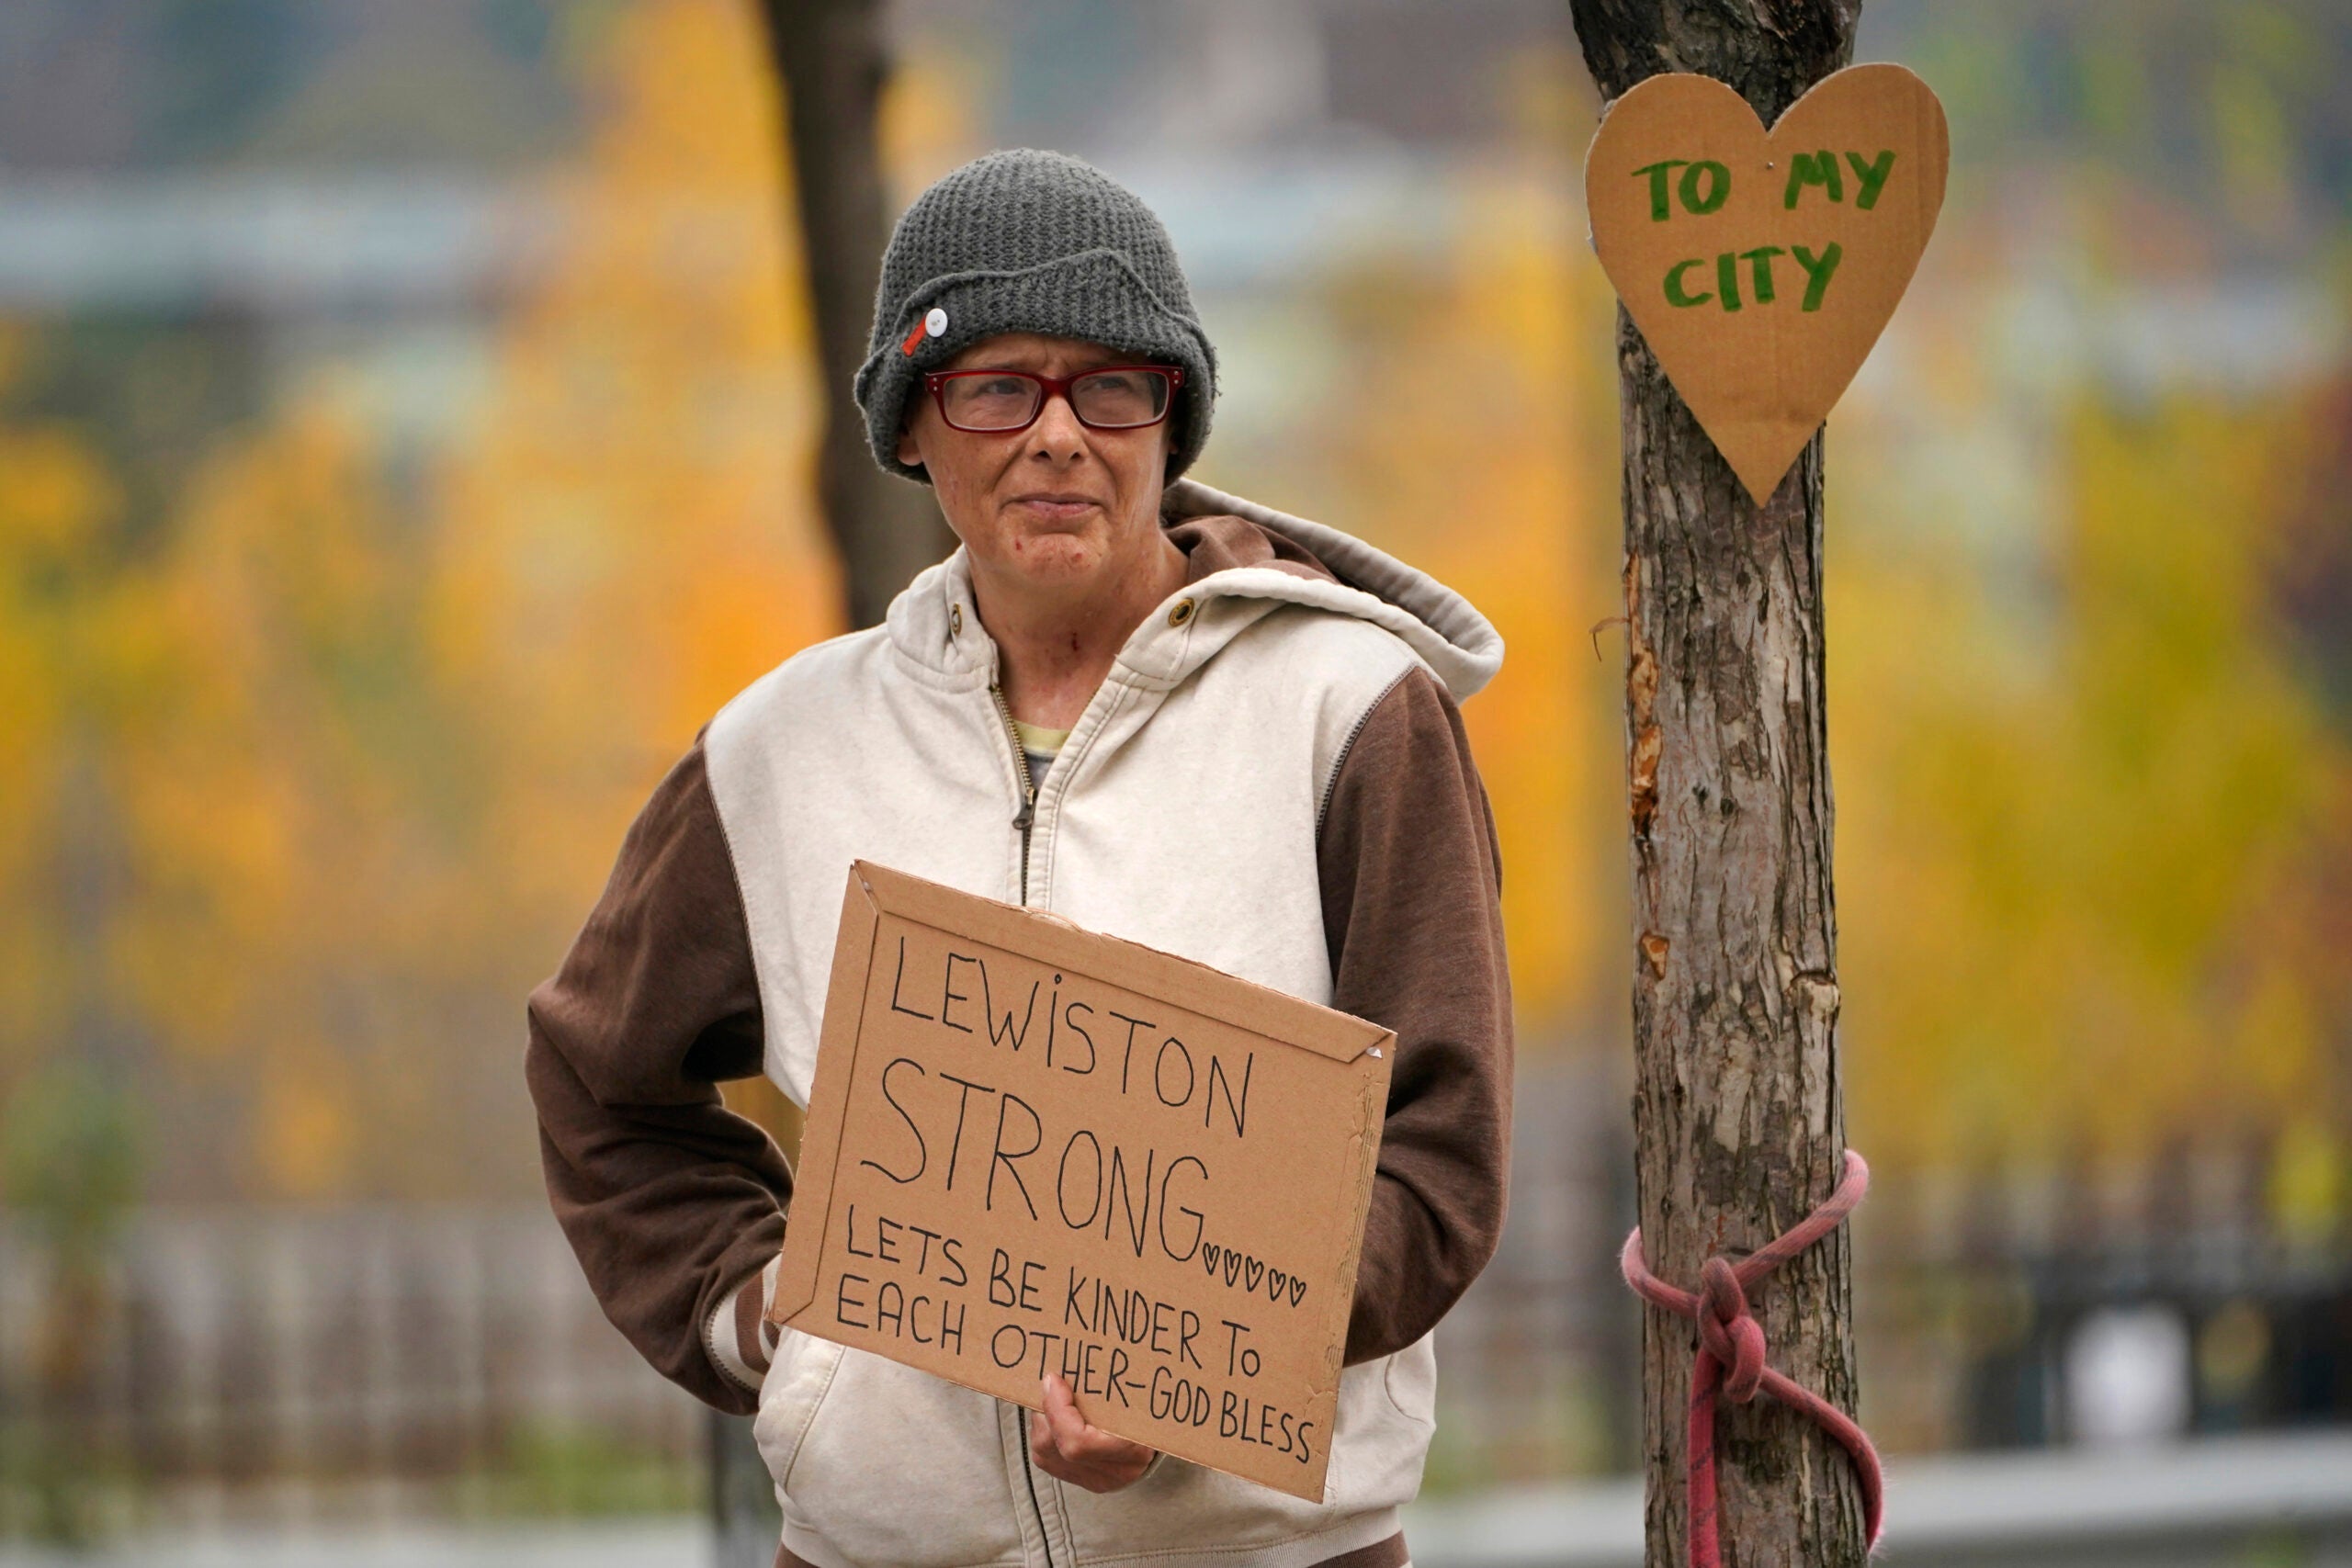 A woman stands outside with a sign in hand that reads "Lewiston strong" following a mass shooting.